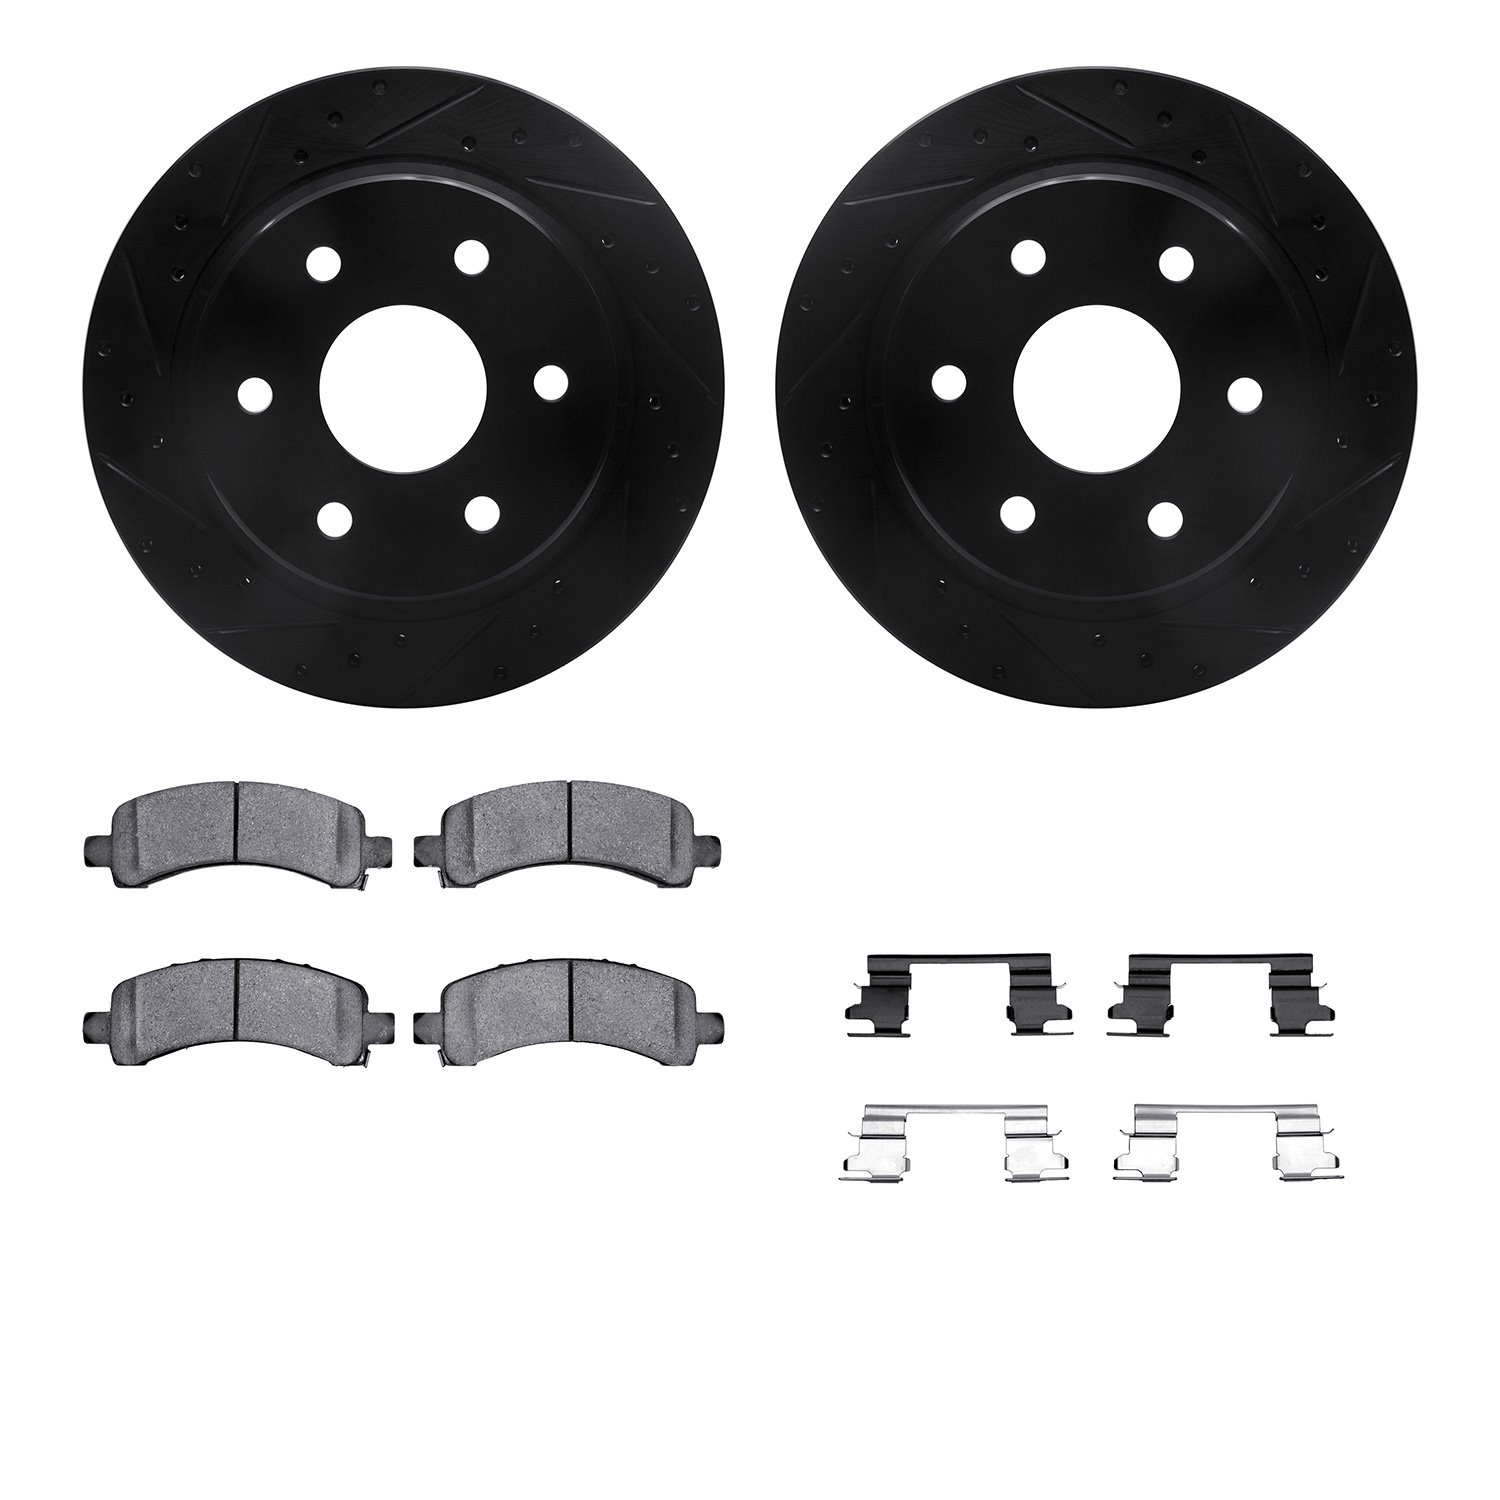 8412-48029 Drilled/Slotted Brake Rotors with Ultimate-Duty Brake Pads Kit & Hardware [Black], 2002-2014 GM, Position: Rear